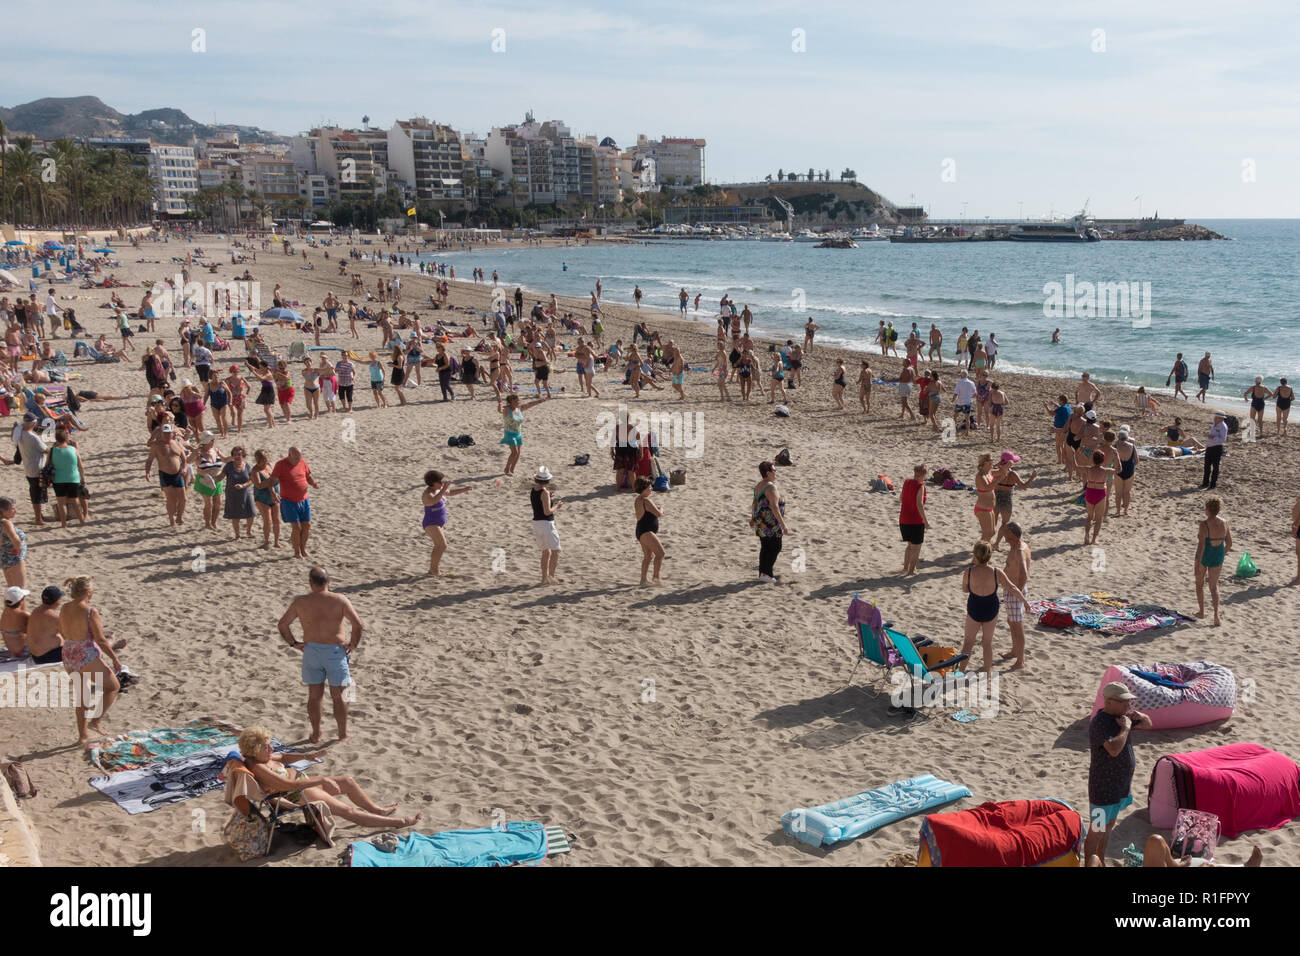 Benidorm, Costa Blanca, Spain 12th November 2018. Snow bird holiday makers  enjoy the winter sun in Spain with daytime temperatures in the mid 20's  Celsius bringing large crowds onto the beach where